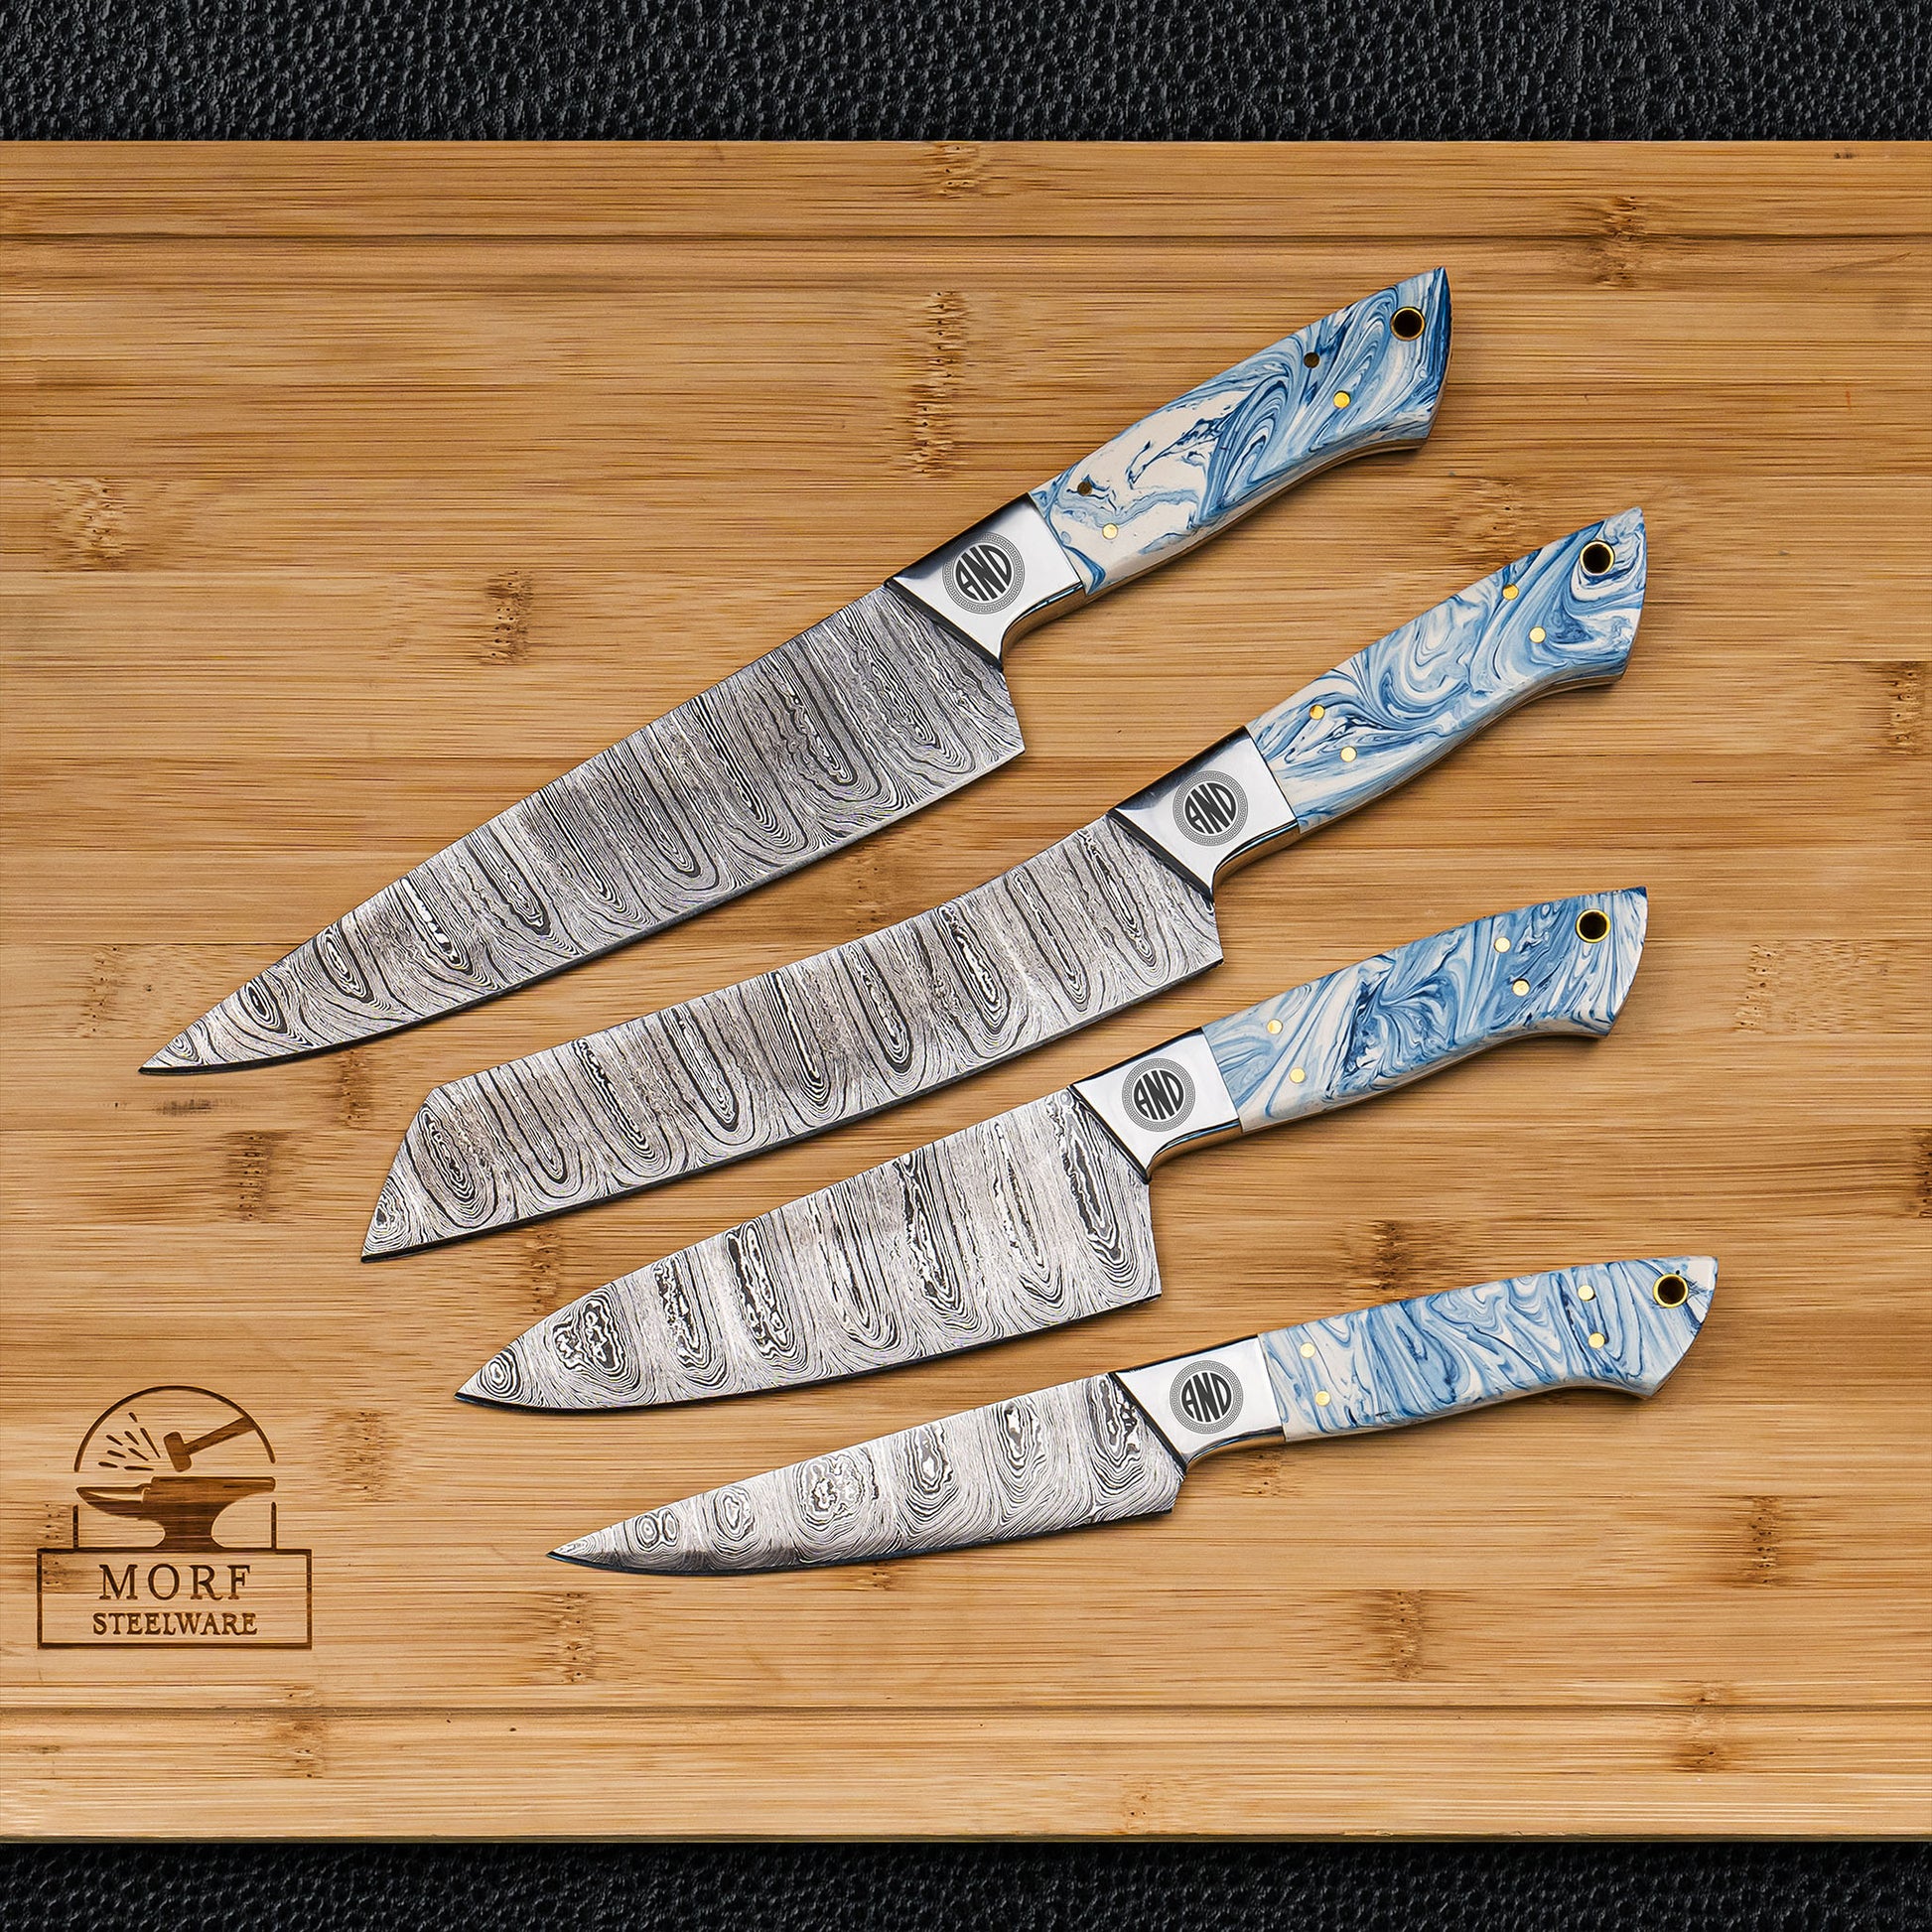 HANDMADE HIGH CARBON STEEL CHEF KNIFE KITCHEN KNIVES CHEF SET